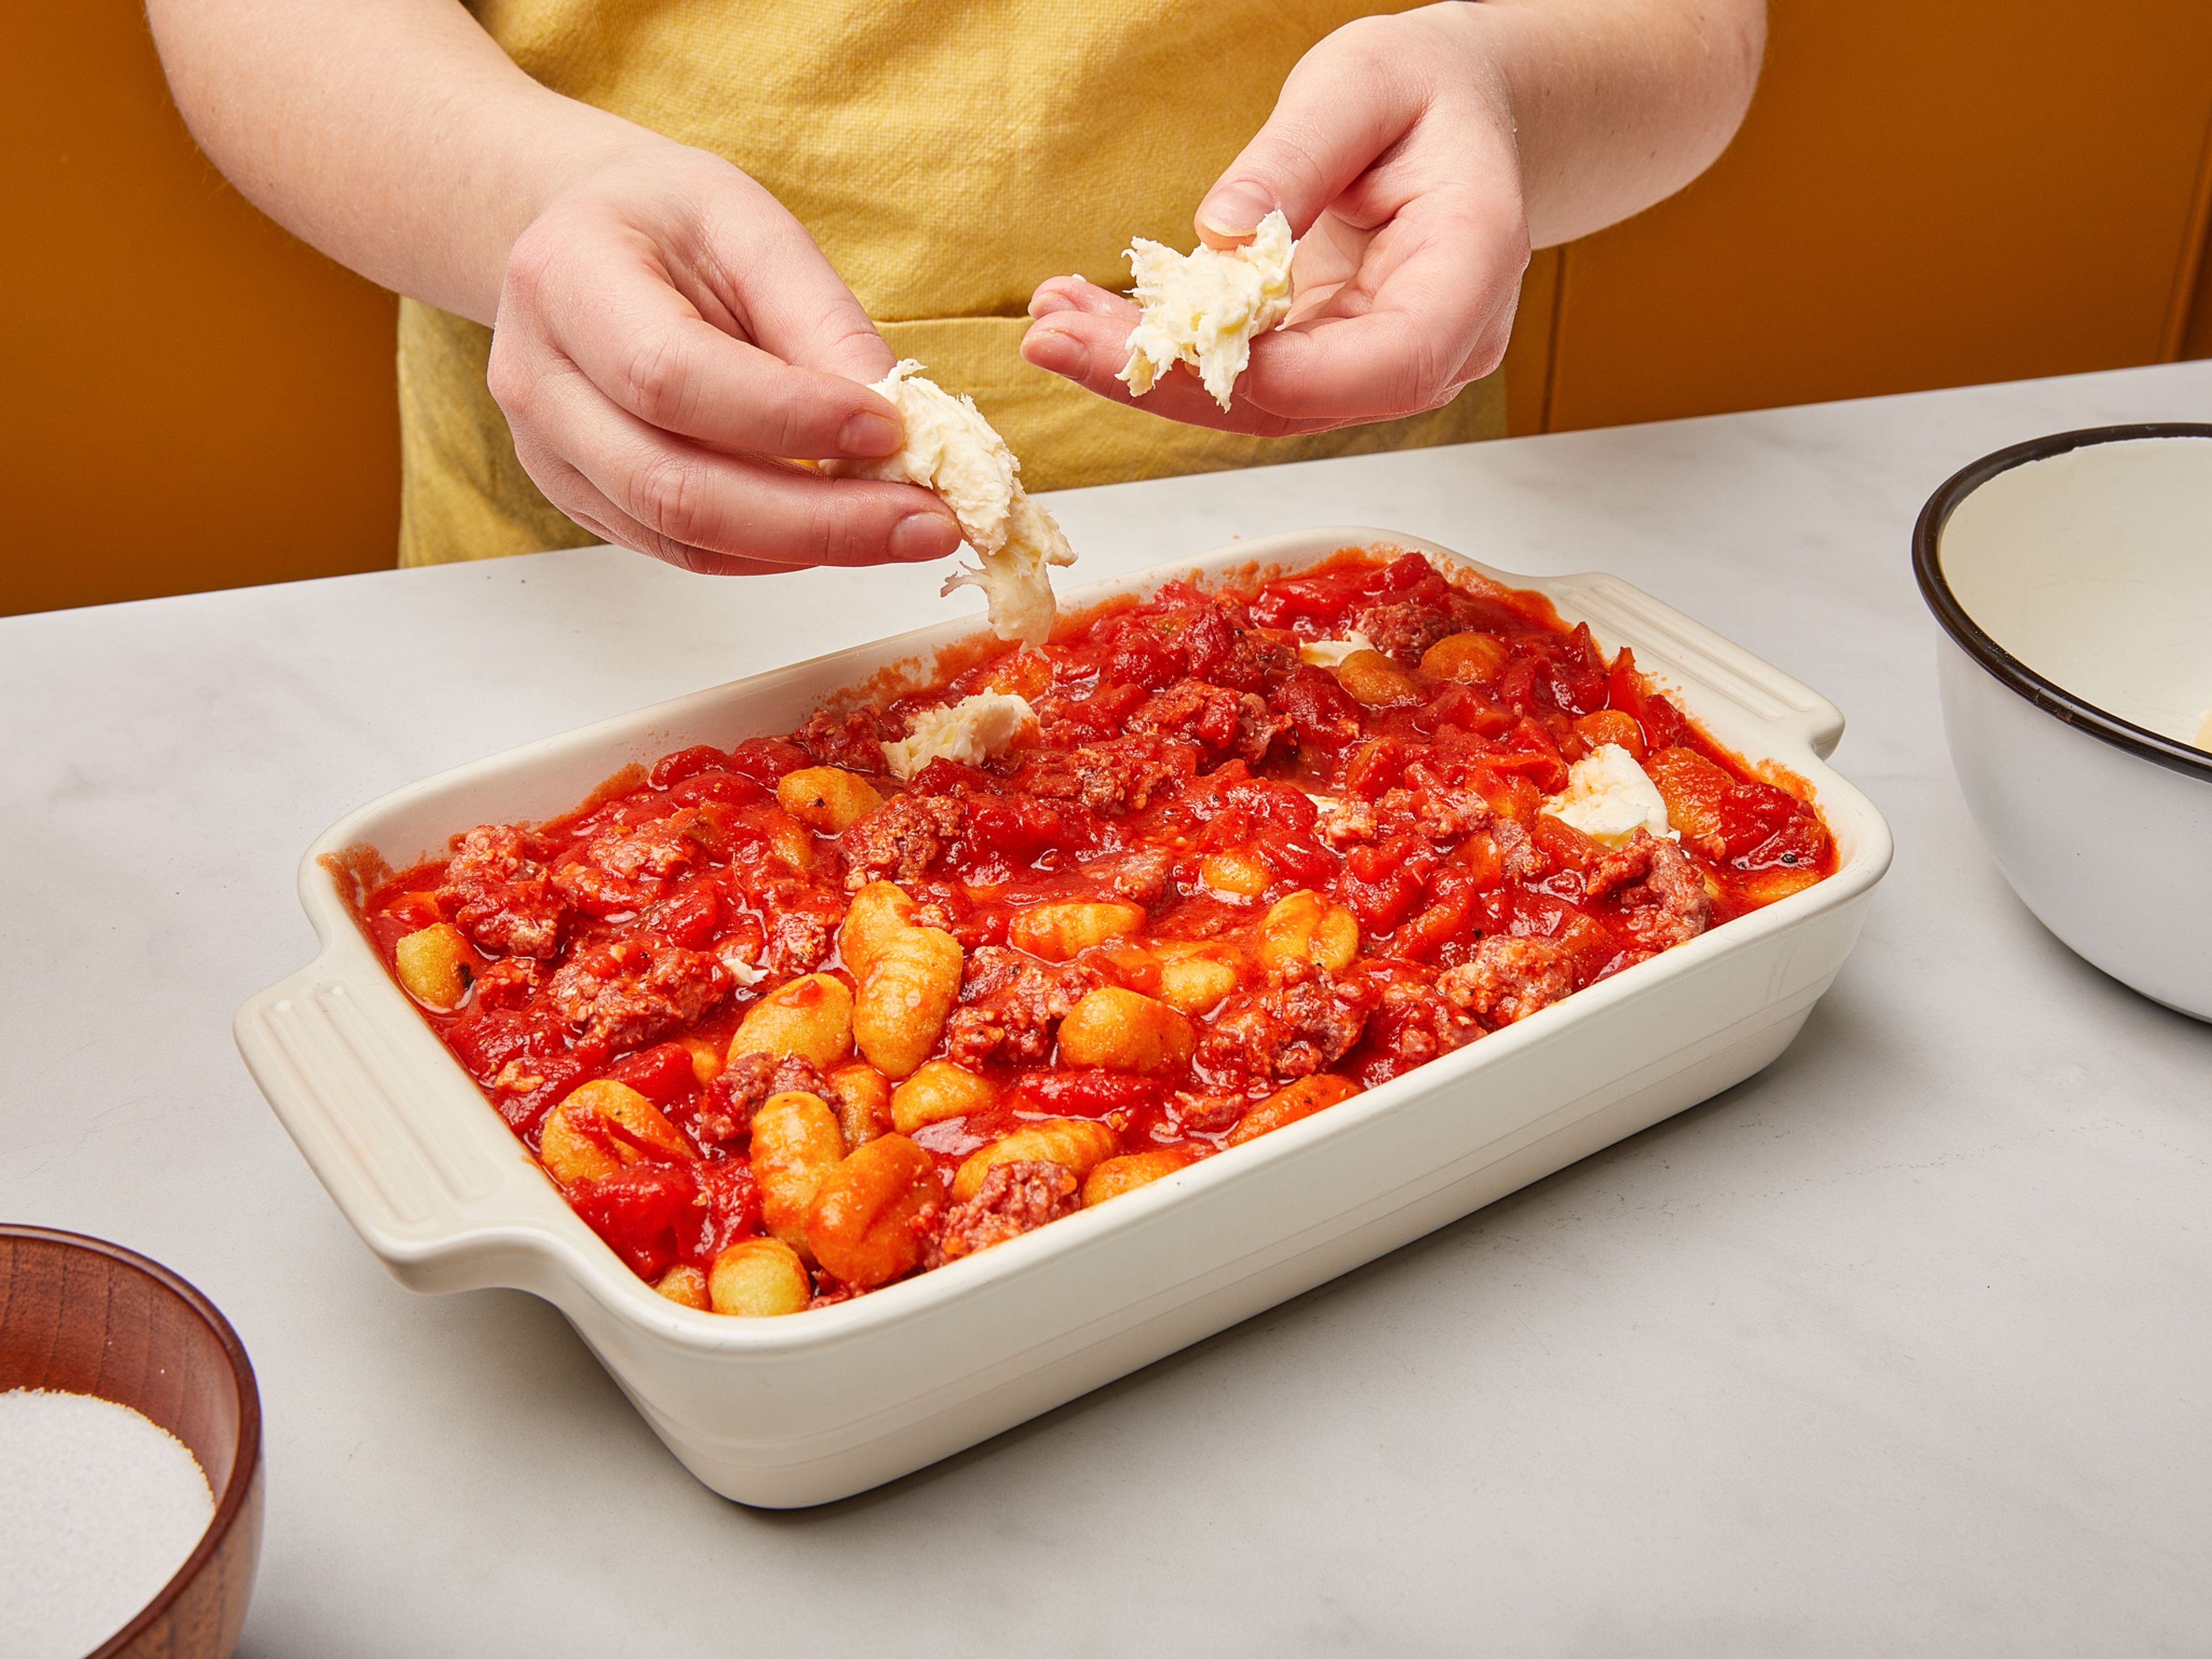 Add the sauce to the gnocchi and stir well to combine. Drain the mozzarella and roughly tear it over the top of the baking dish, along with the basil. Transfer the baking dish to the oven and bake at 200°C/400°F for approx. 20 min. Remove from the oven and serve immediately. Enjoy!